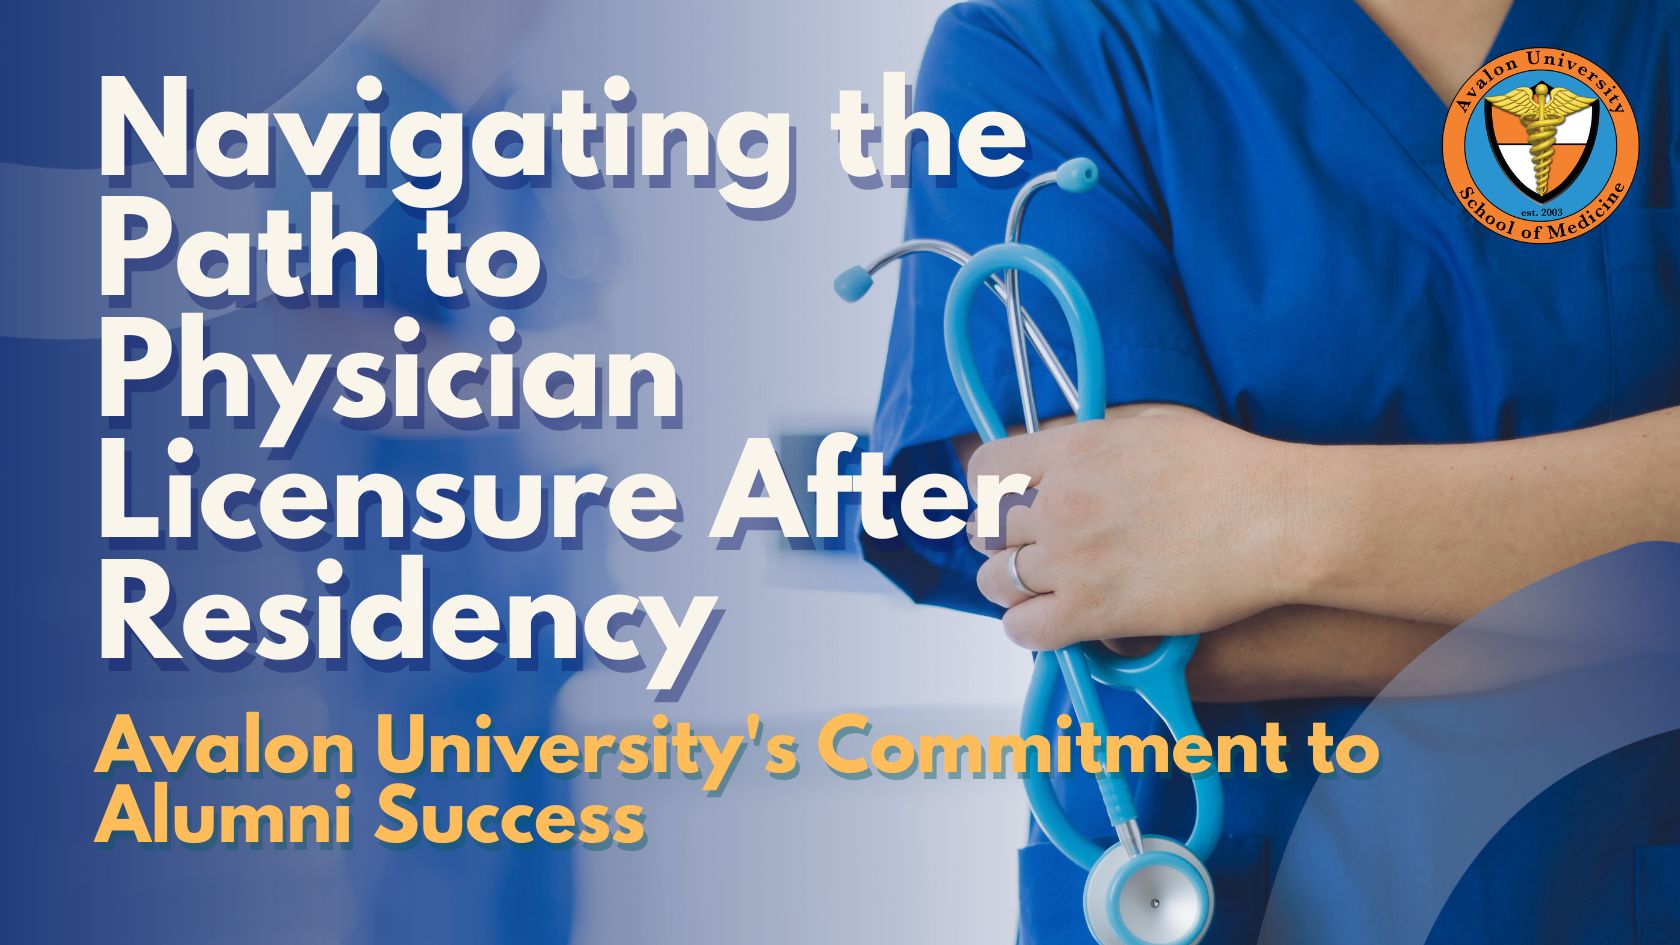 Navigating the Path to Physician Licensure After Residency